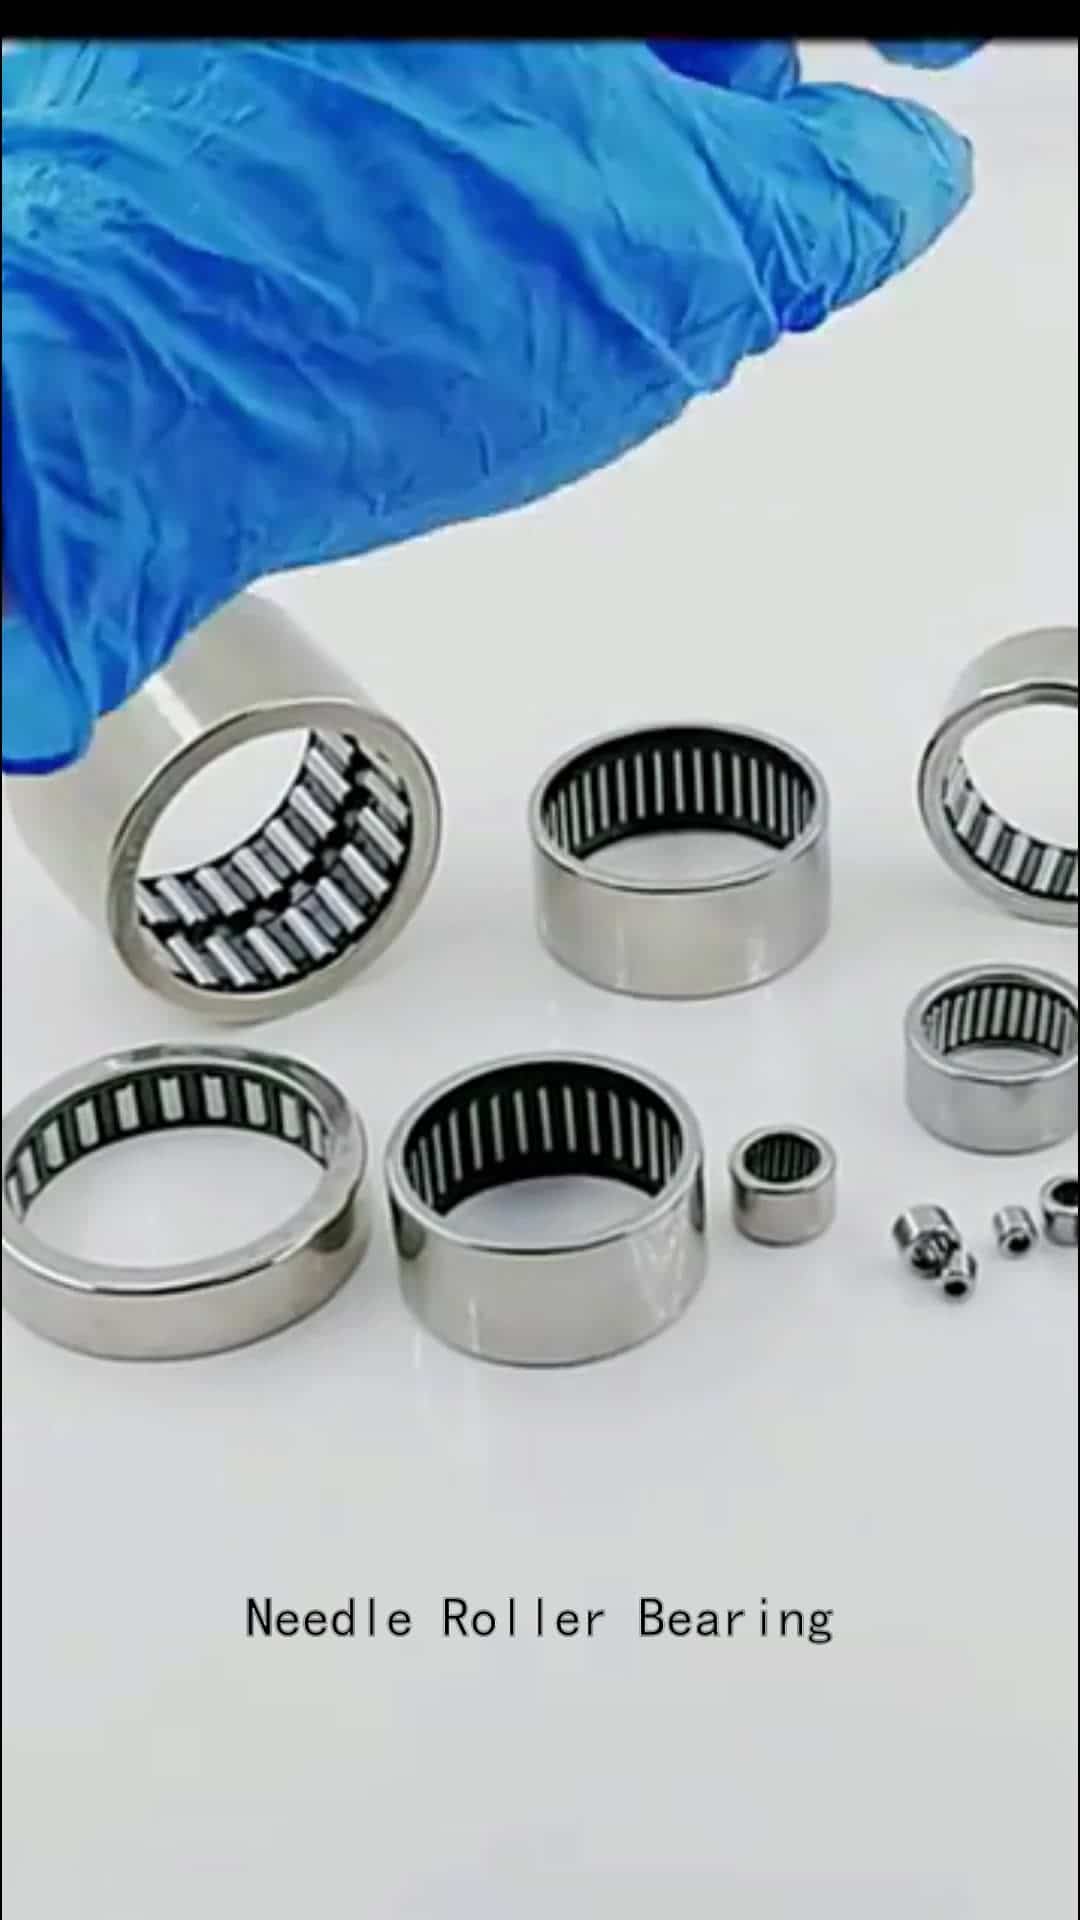 High quality Chrome Steel drawn cup needle roller bearing HK2520